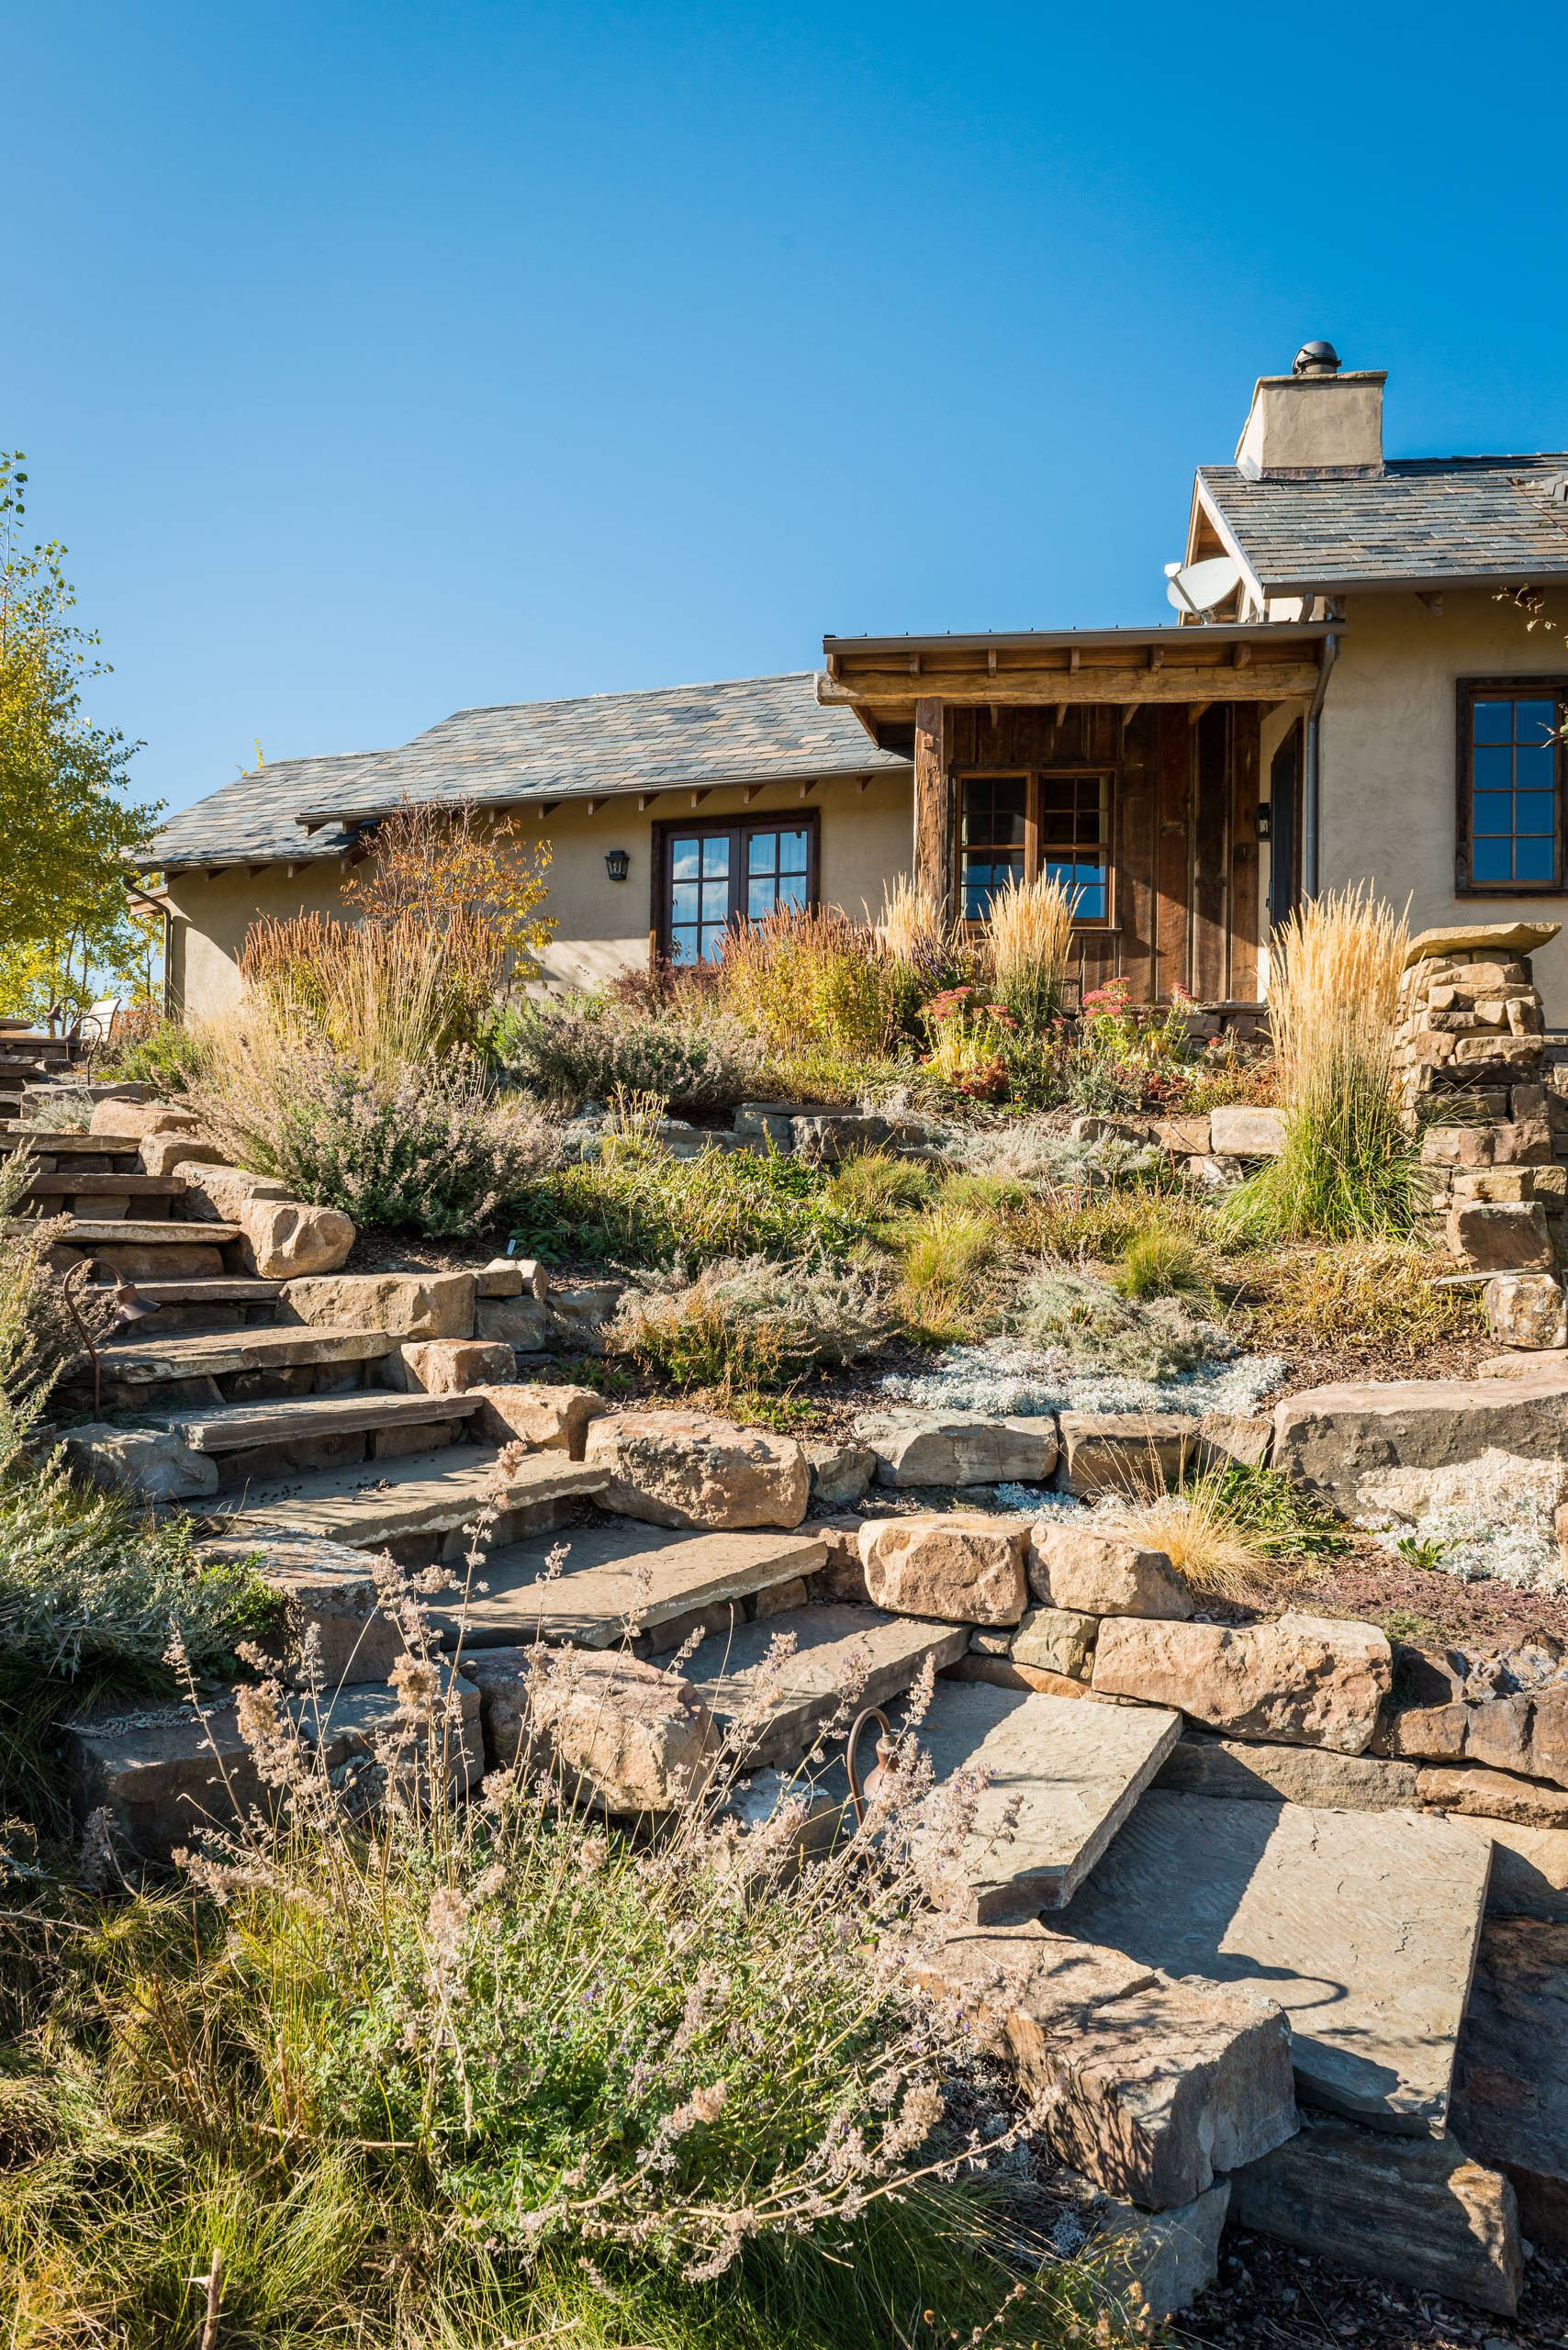 Landscape Design Ideas
 15 Stunning Rustic Landscape Designs That Will Take Your